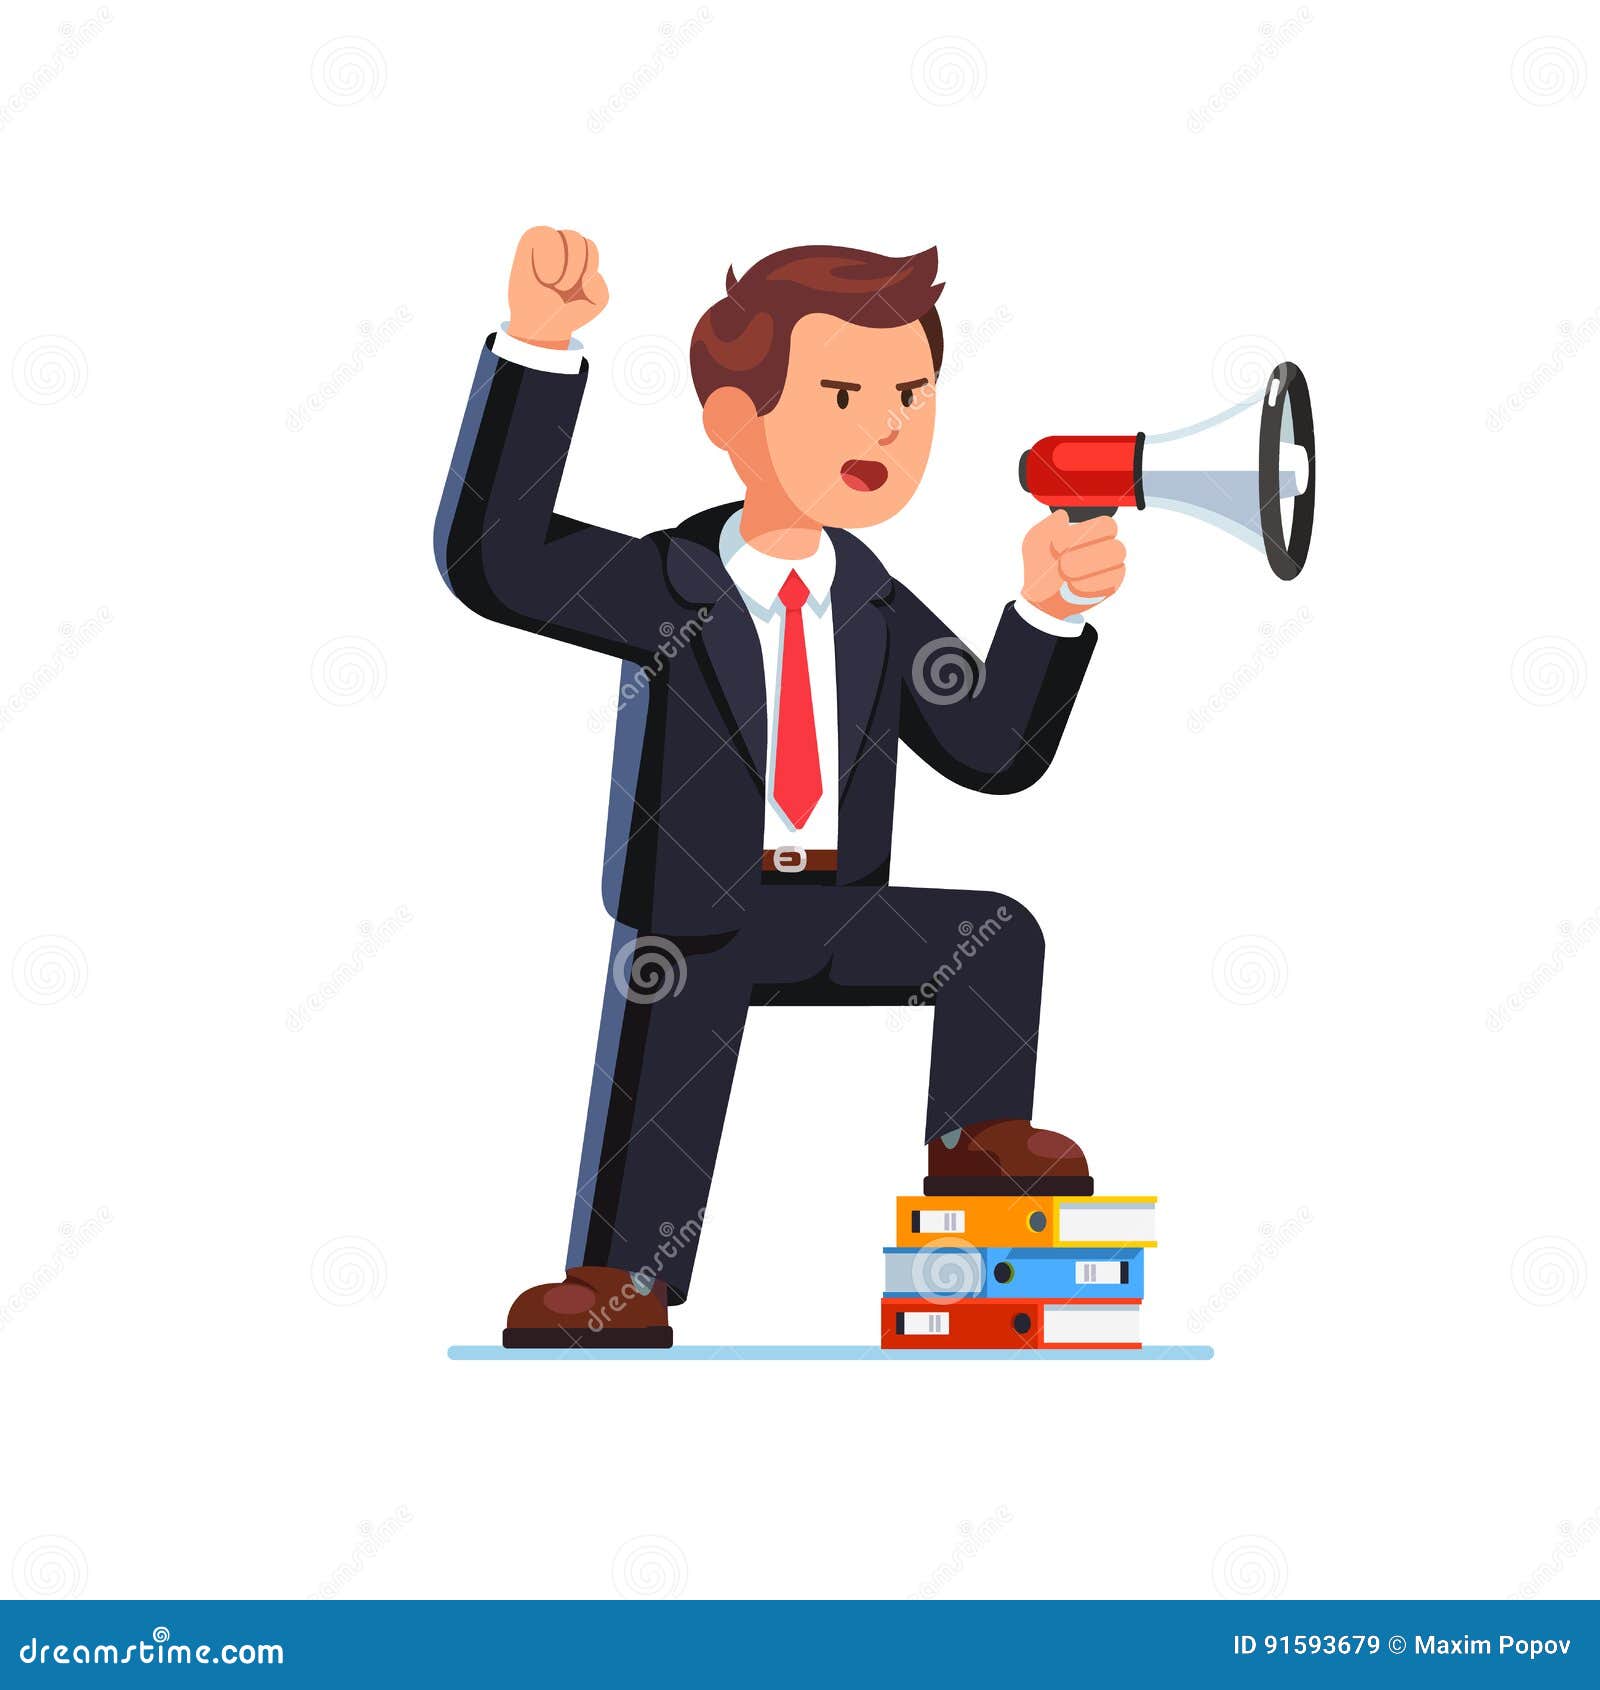 Serious Business Man Shouting through Megaphone Stock Vector - Illustration of isolated, leader: 91593679